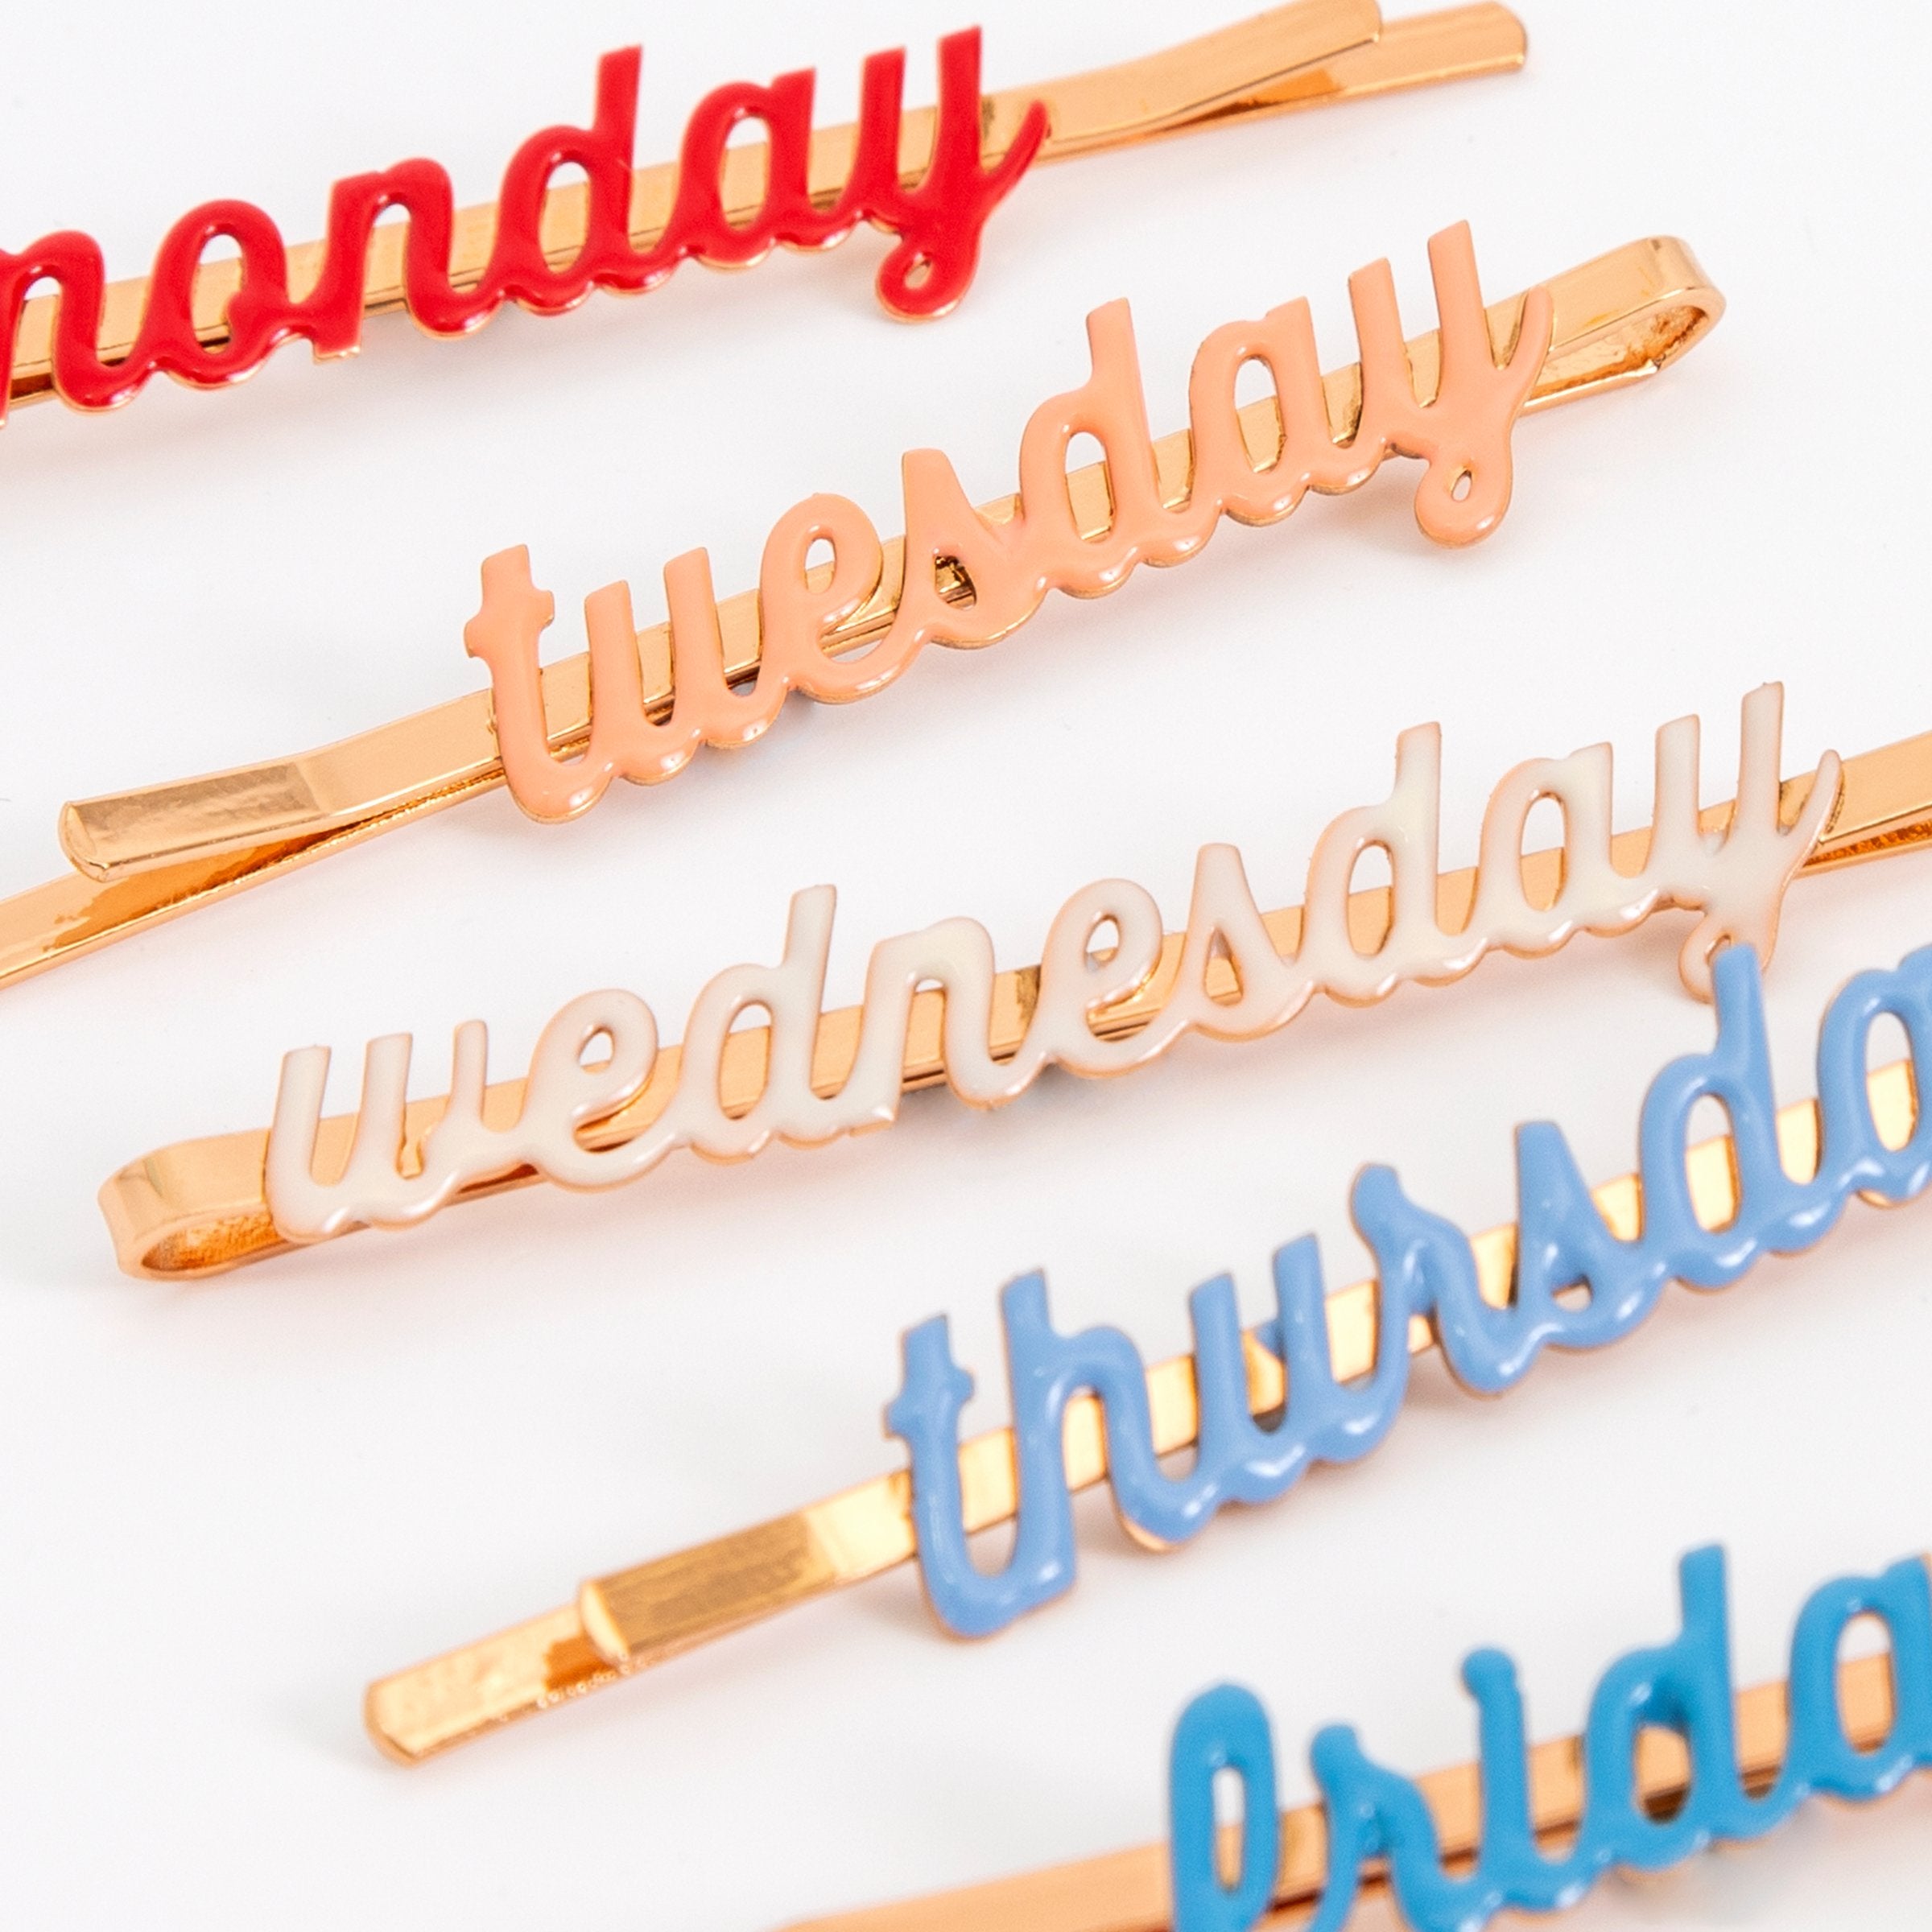 Our days of the week hair slides are wonderful hair accessories for kids.